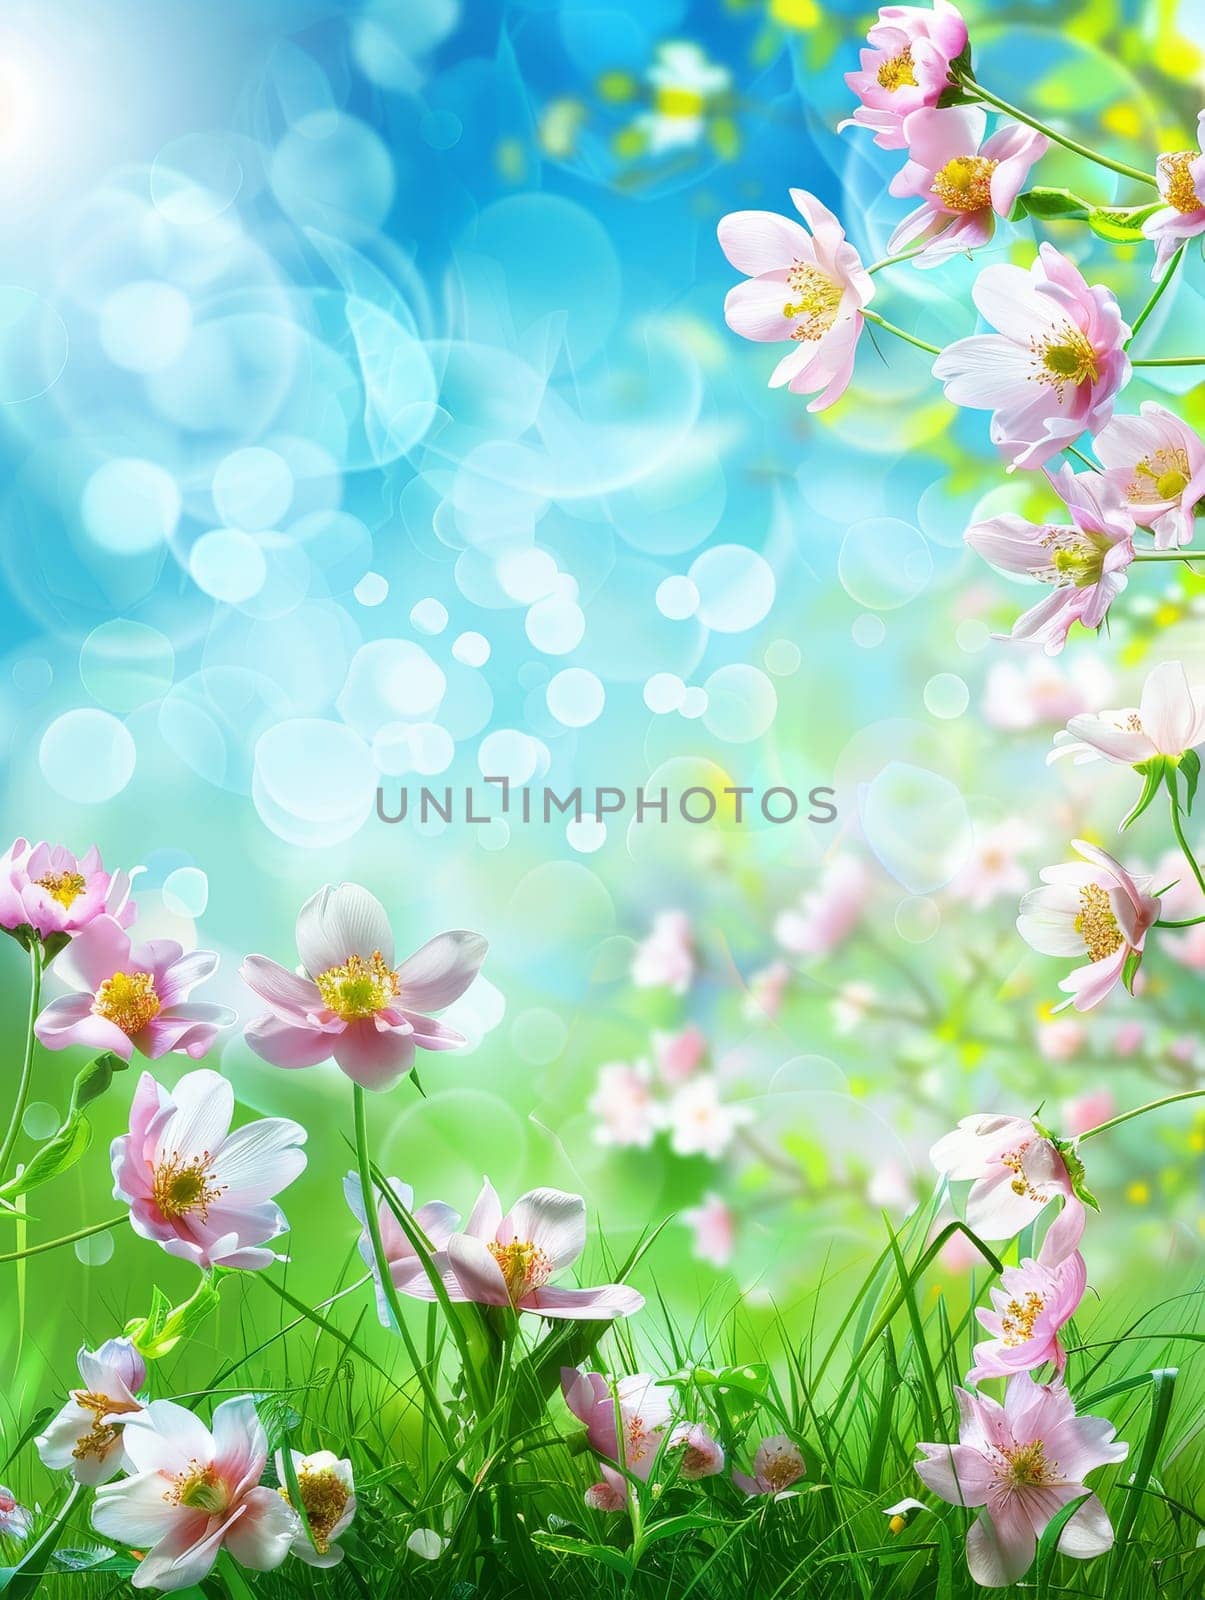 Pink spring blossoms foreground a magical bokeh effect that captures the light's playfulness. The image evokes the enchanting atmosphere of a fairy tale by sfinks